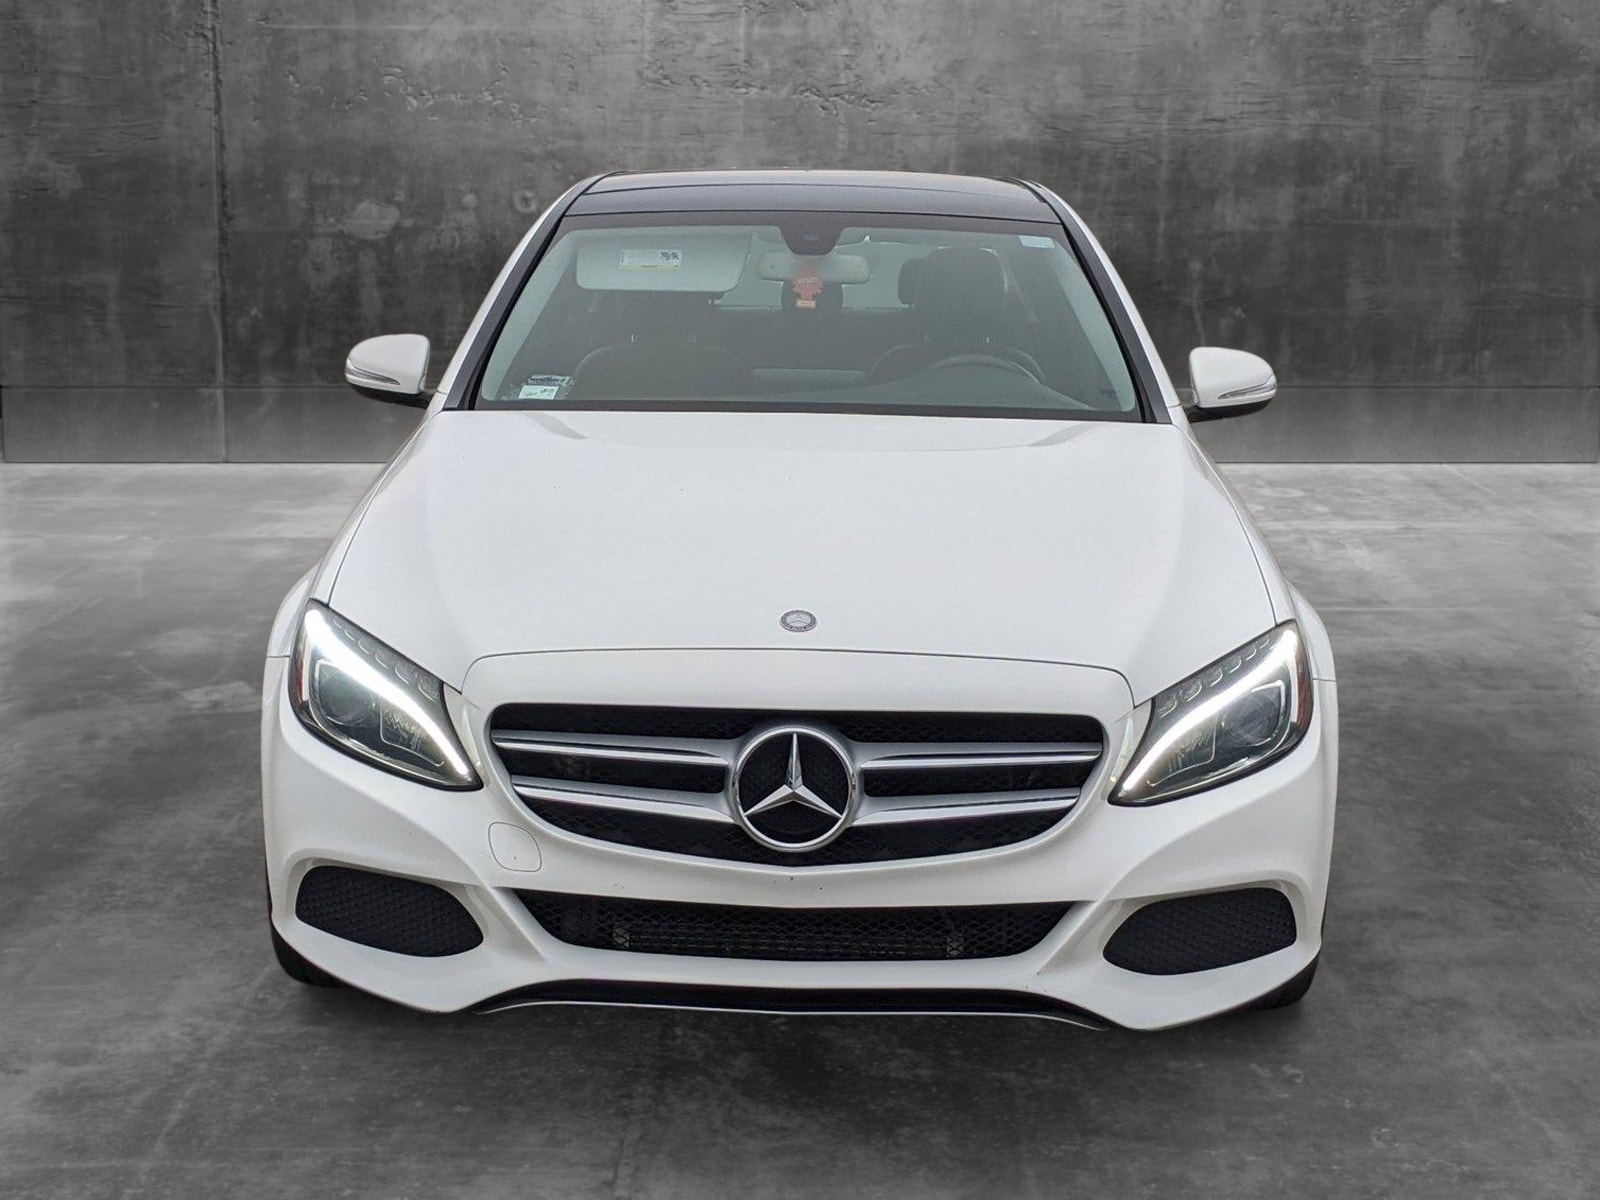 Used 2015 Mercedes-Benz C-Class C300 with VIN 55SWF4JB9FU079709 for sale in Hayward, CA